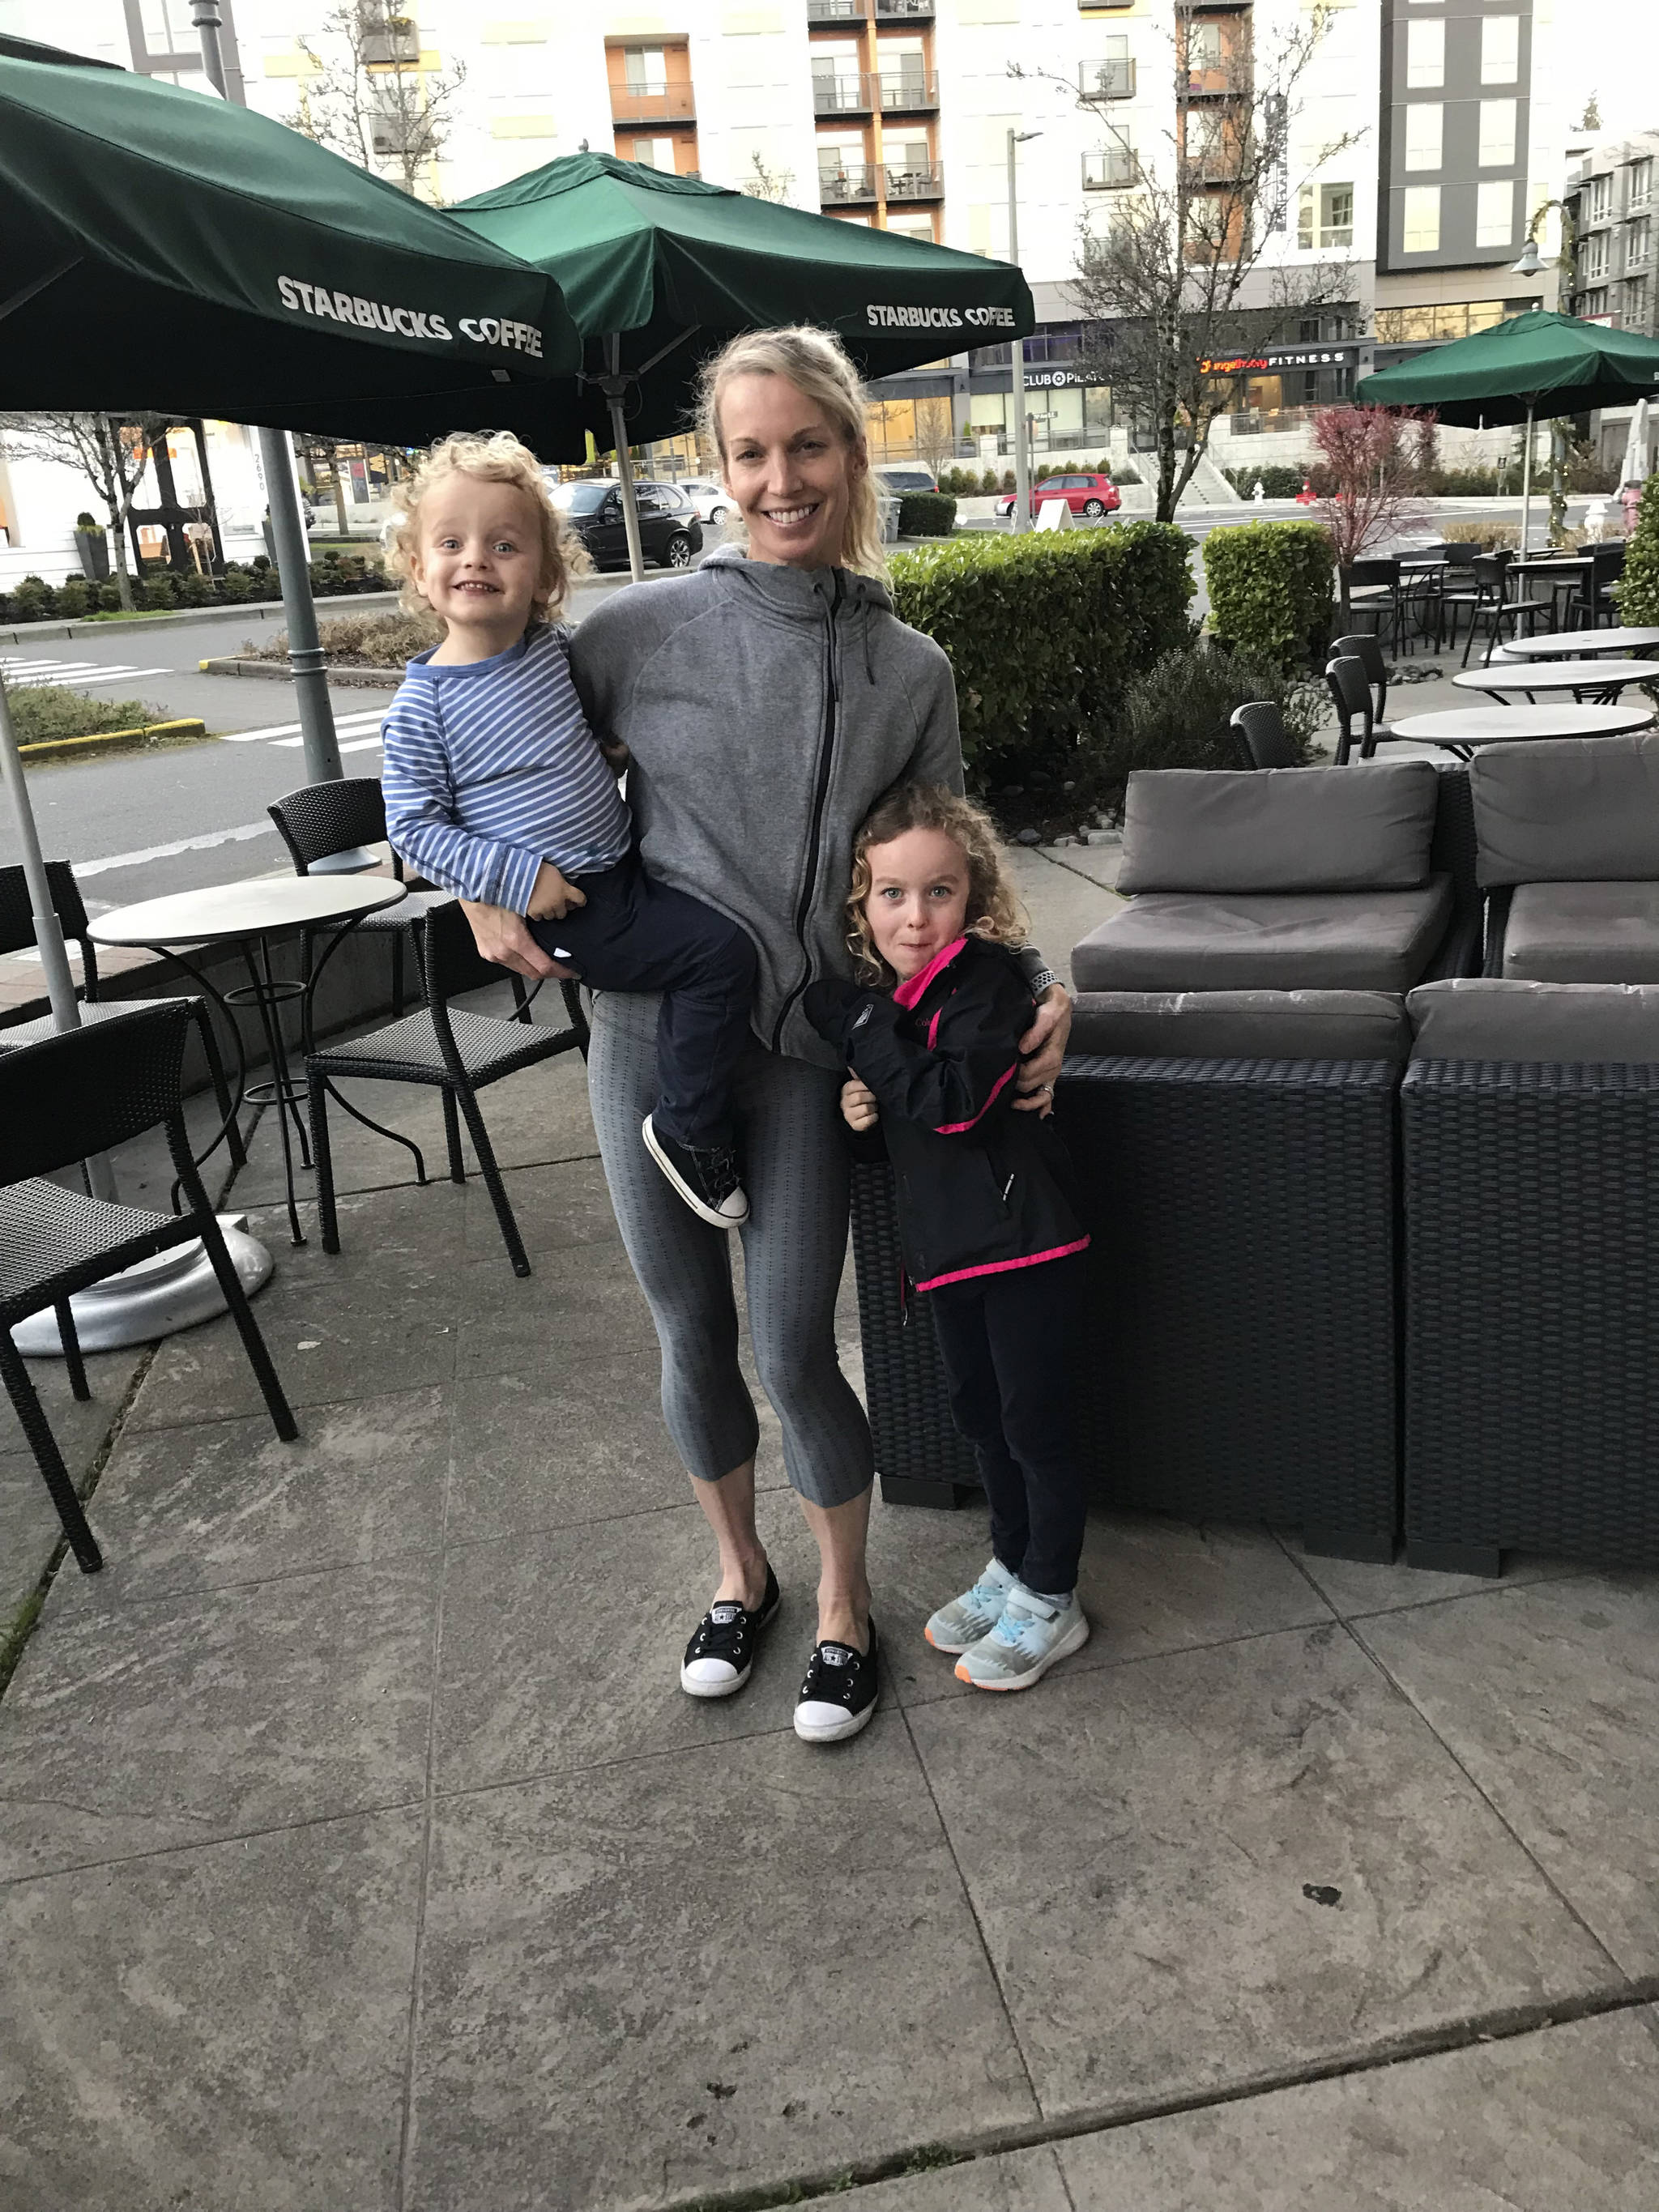 Mercer Island resident Desiree Berry, pictured with her children Beau, 5, and Bear, 3, clinched a berth at the United States Olympic trials after clocking a time of 2:39.17 at the Cal International Marathon on Dec. 2 in Sacramento, California. Shaun Scott, staff photo